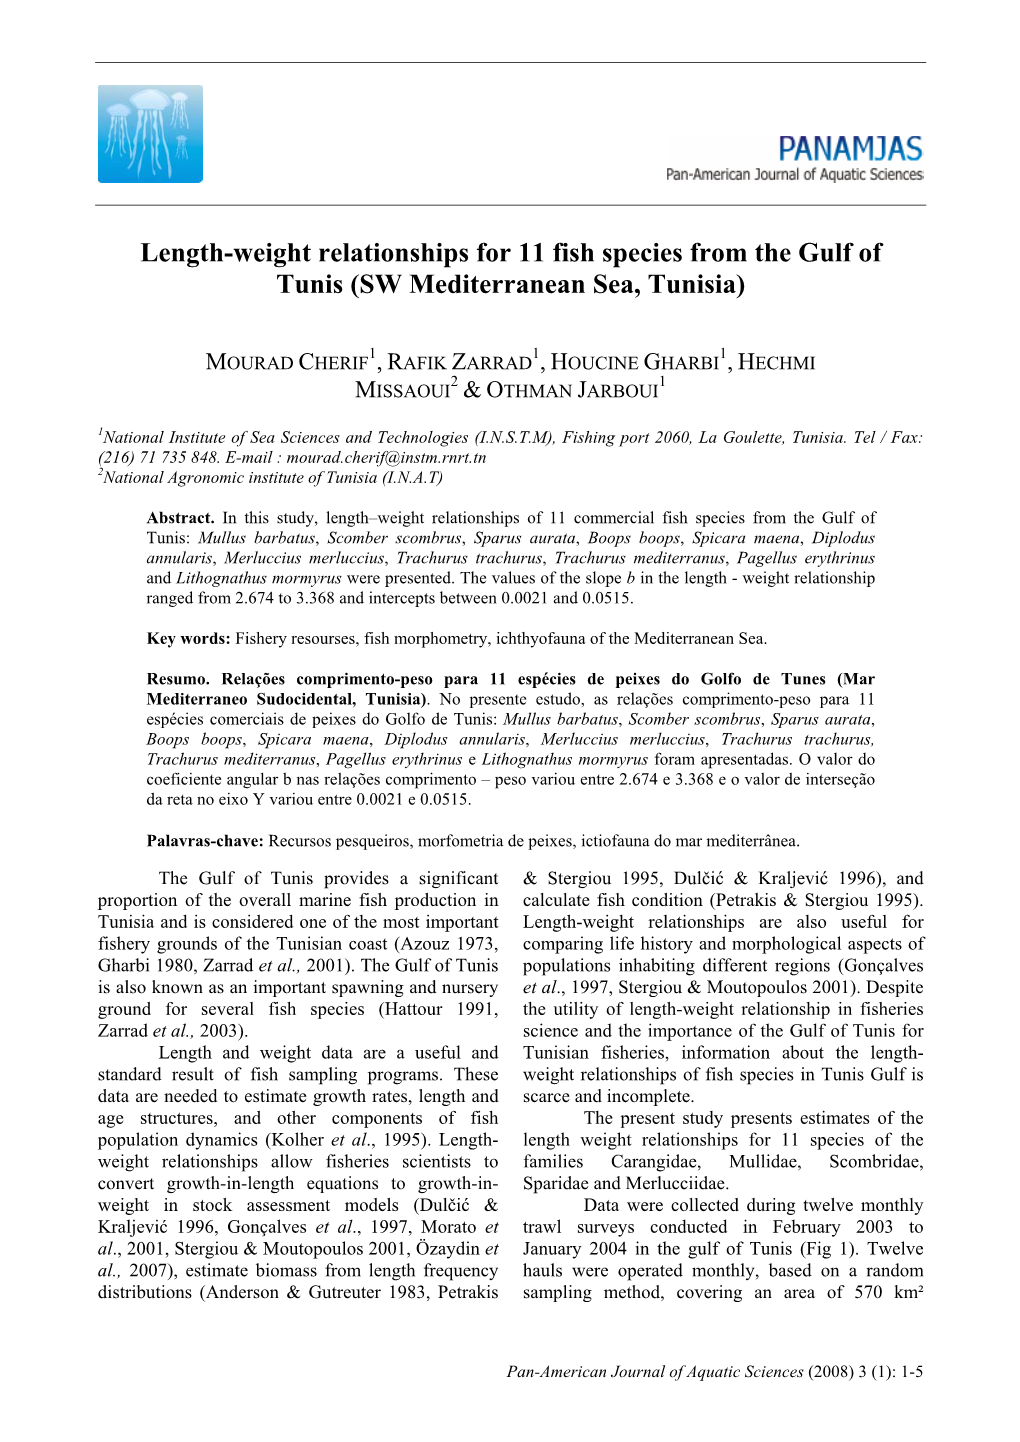 Length-Weight Relationships for 11 Fish Species from the Gulf of Tunis (SW Mediterranean Sea, Tunisia)